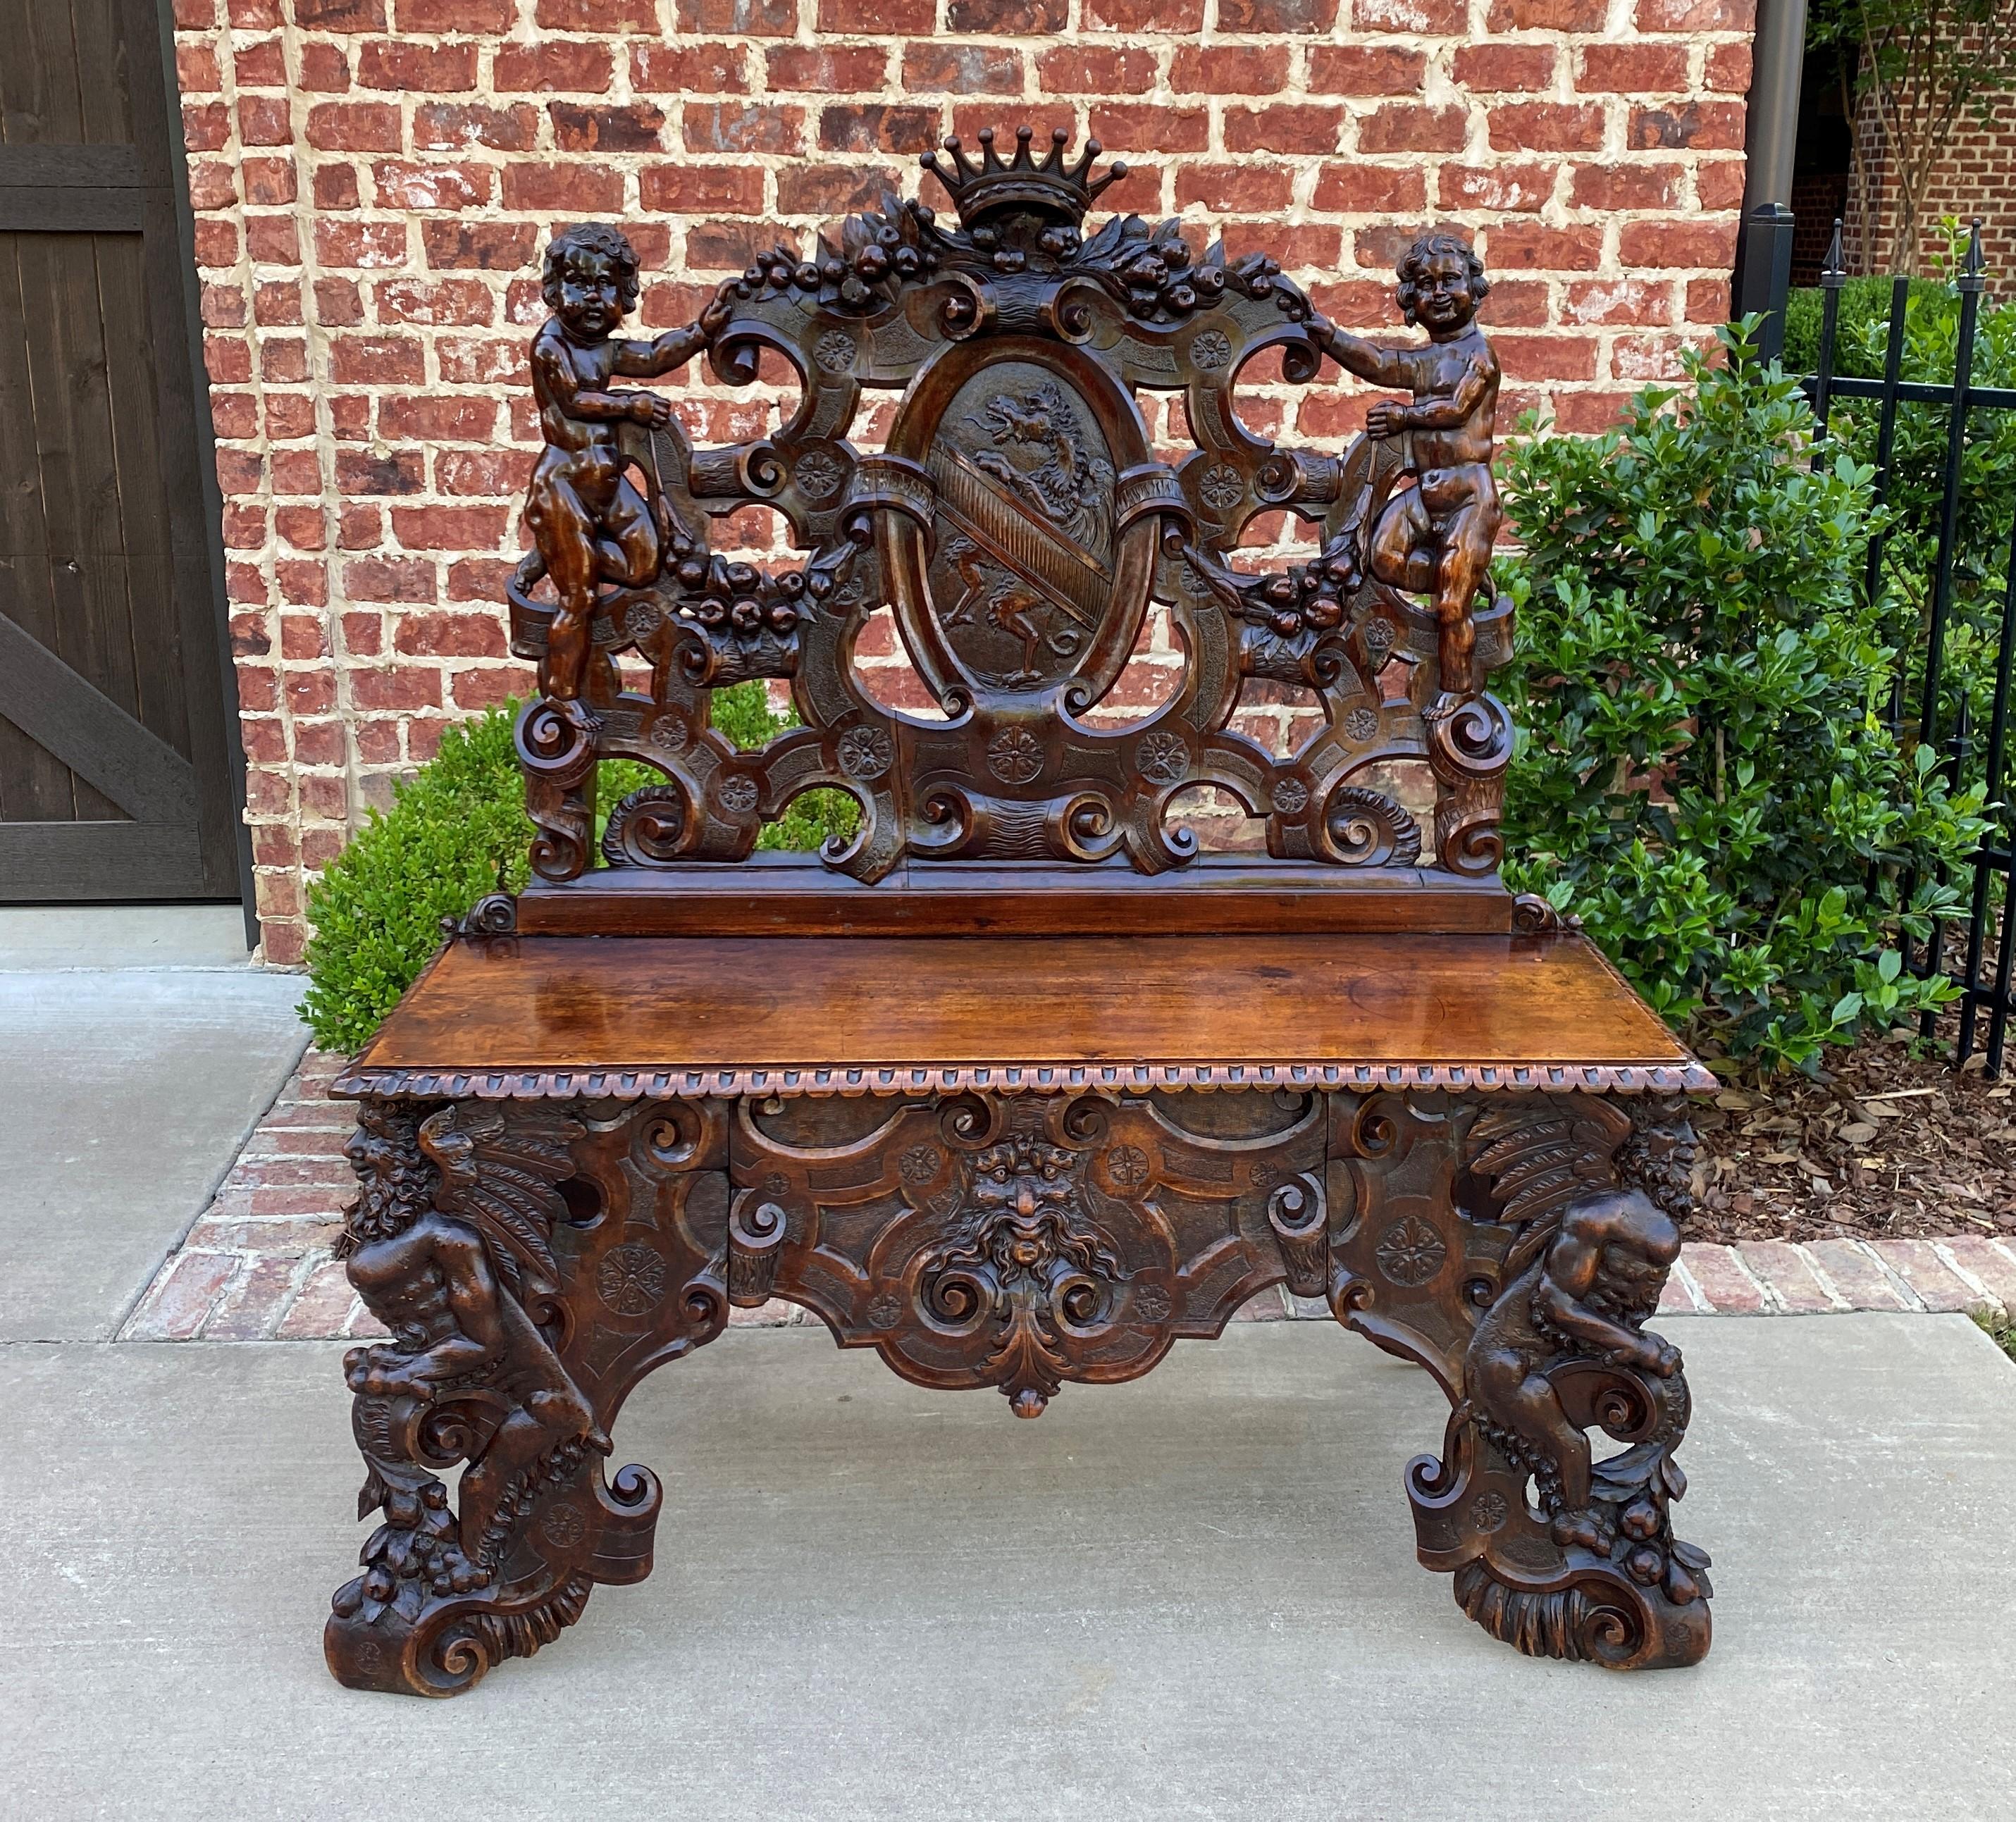 Exquisite antique French walnut Renaissance revival hall seat, bench or chair~~highly carved with Winged Griffon Cartouche and Cherubs~~c. 1880s 

Rare 19th century French hall seat, bench, settee, or chair~~rarely do we come across such a